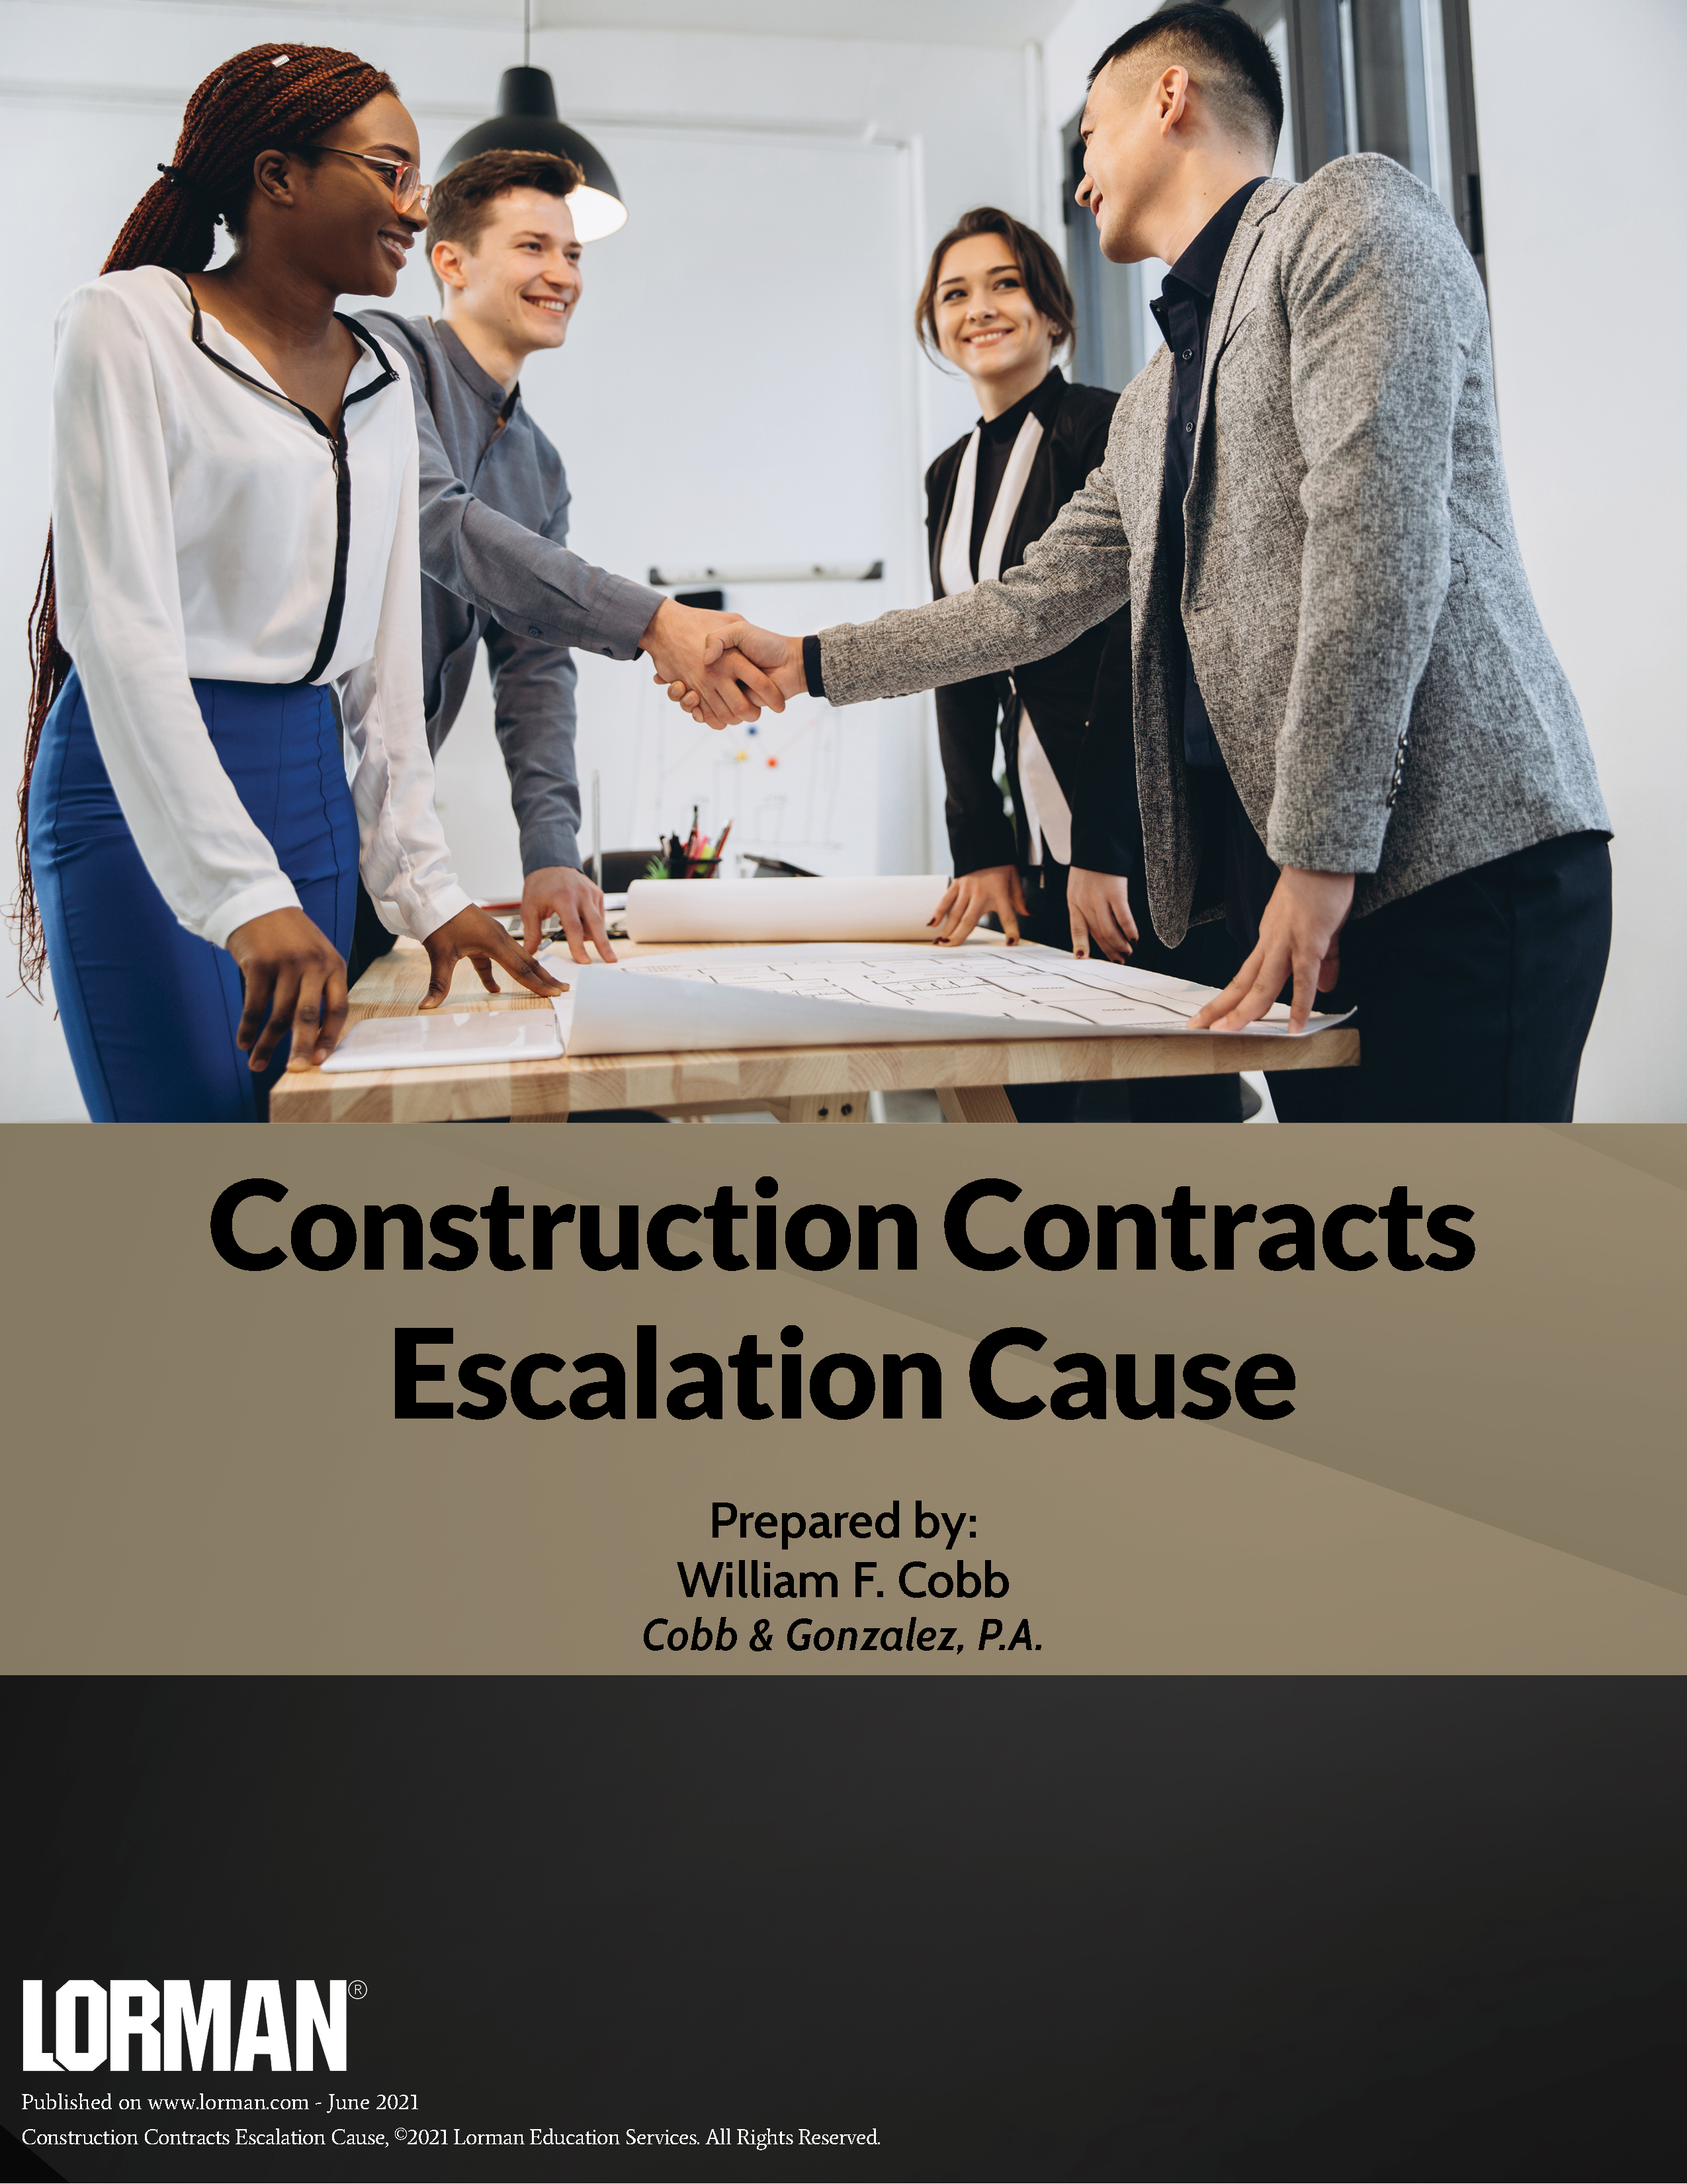 Construction Contracts Escalation Cause